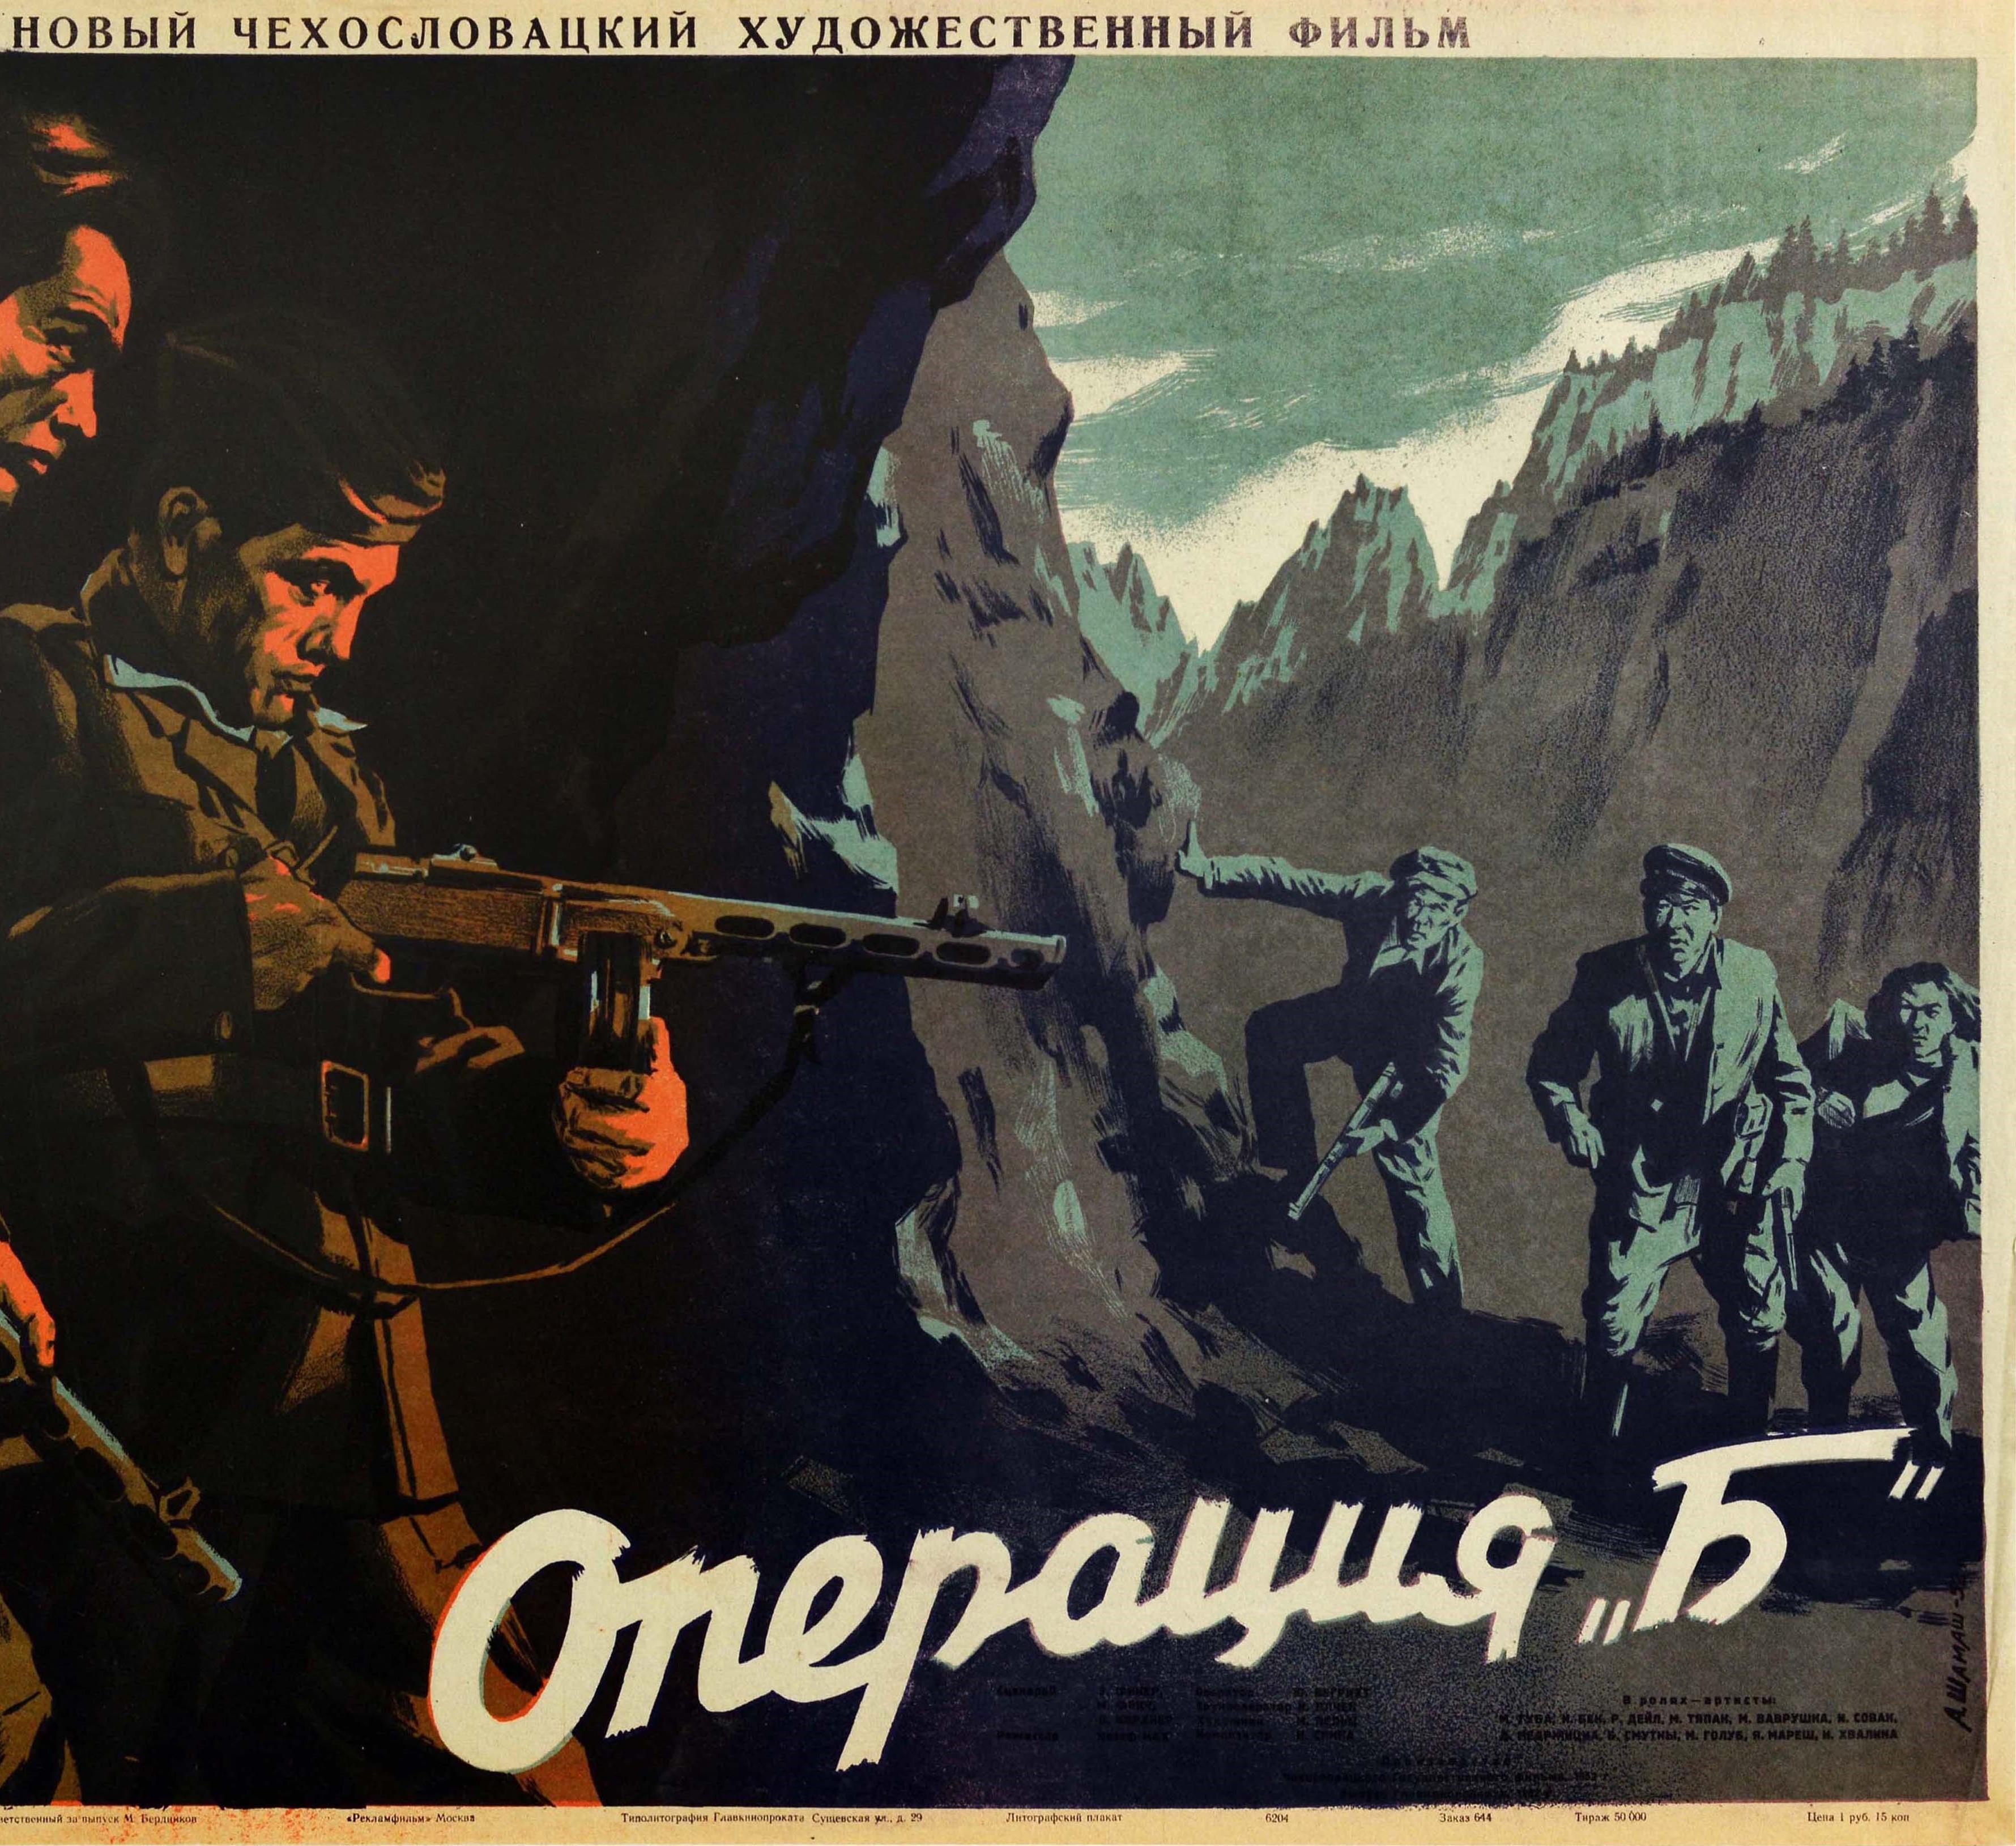 Russian Original Vintage Film Poster Action B Czechoslovakian WWII Movie Insurgent Army For Sale